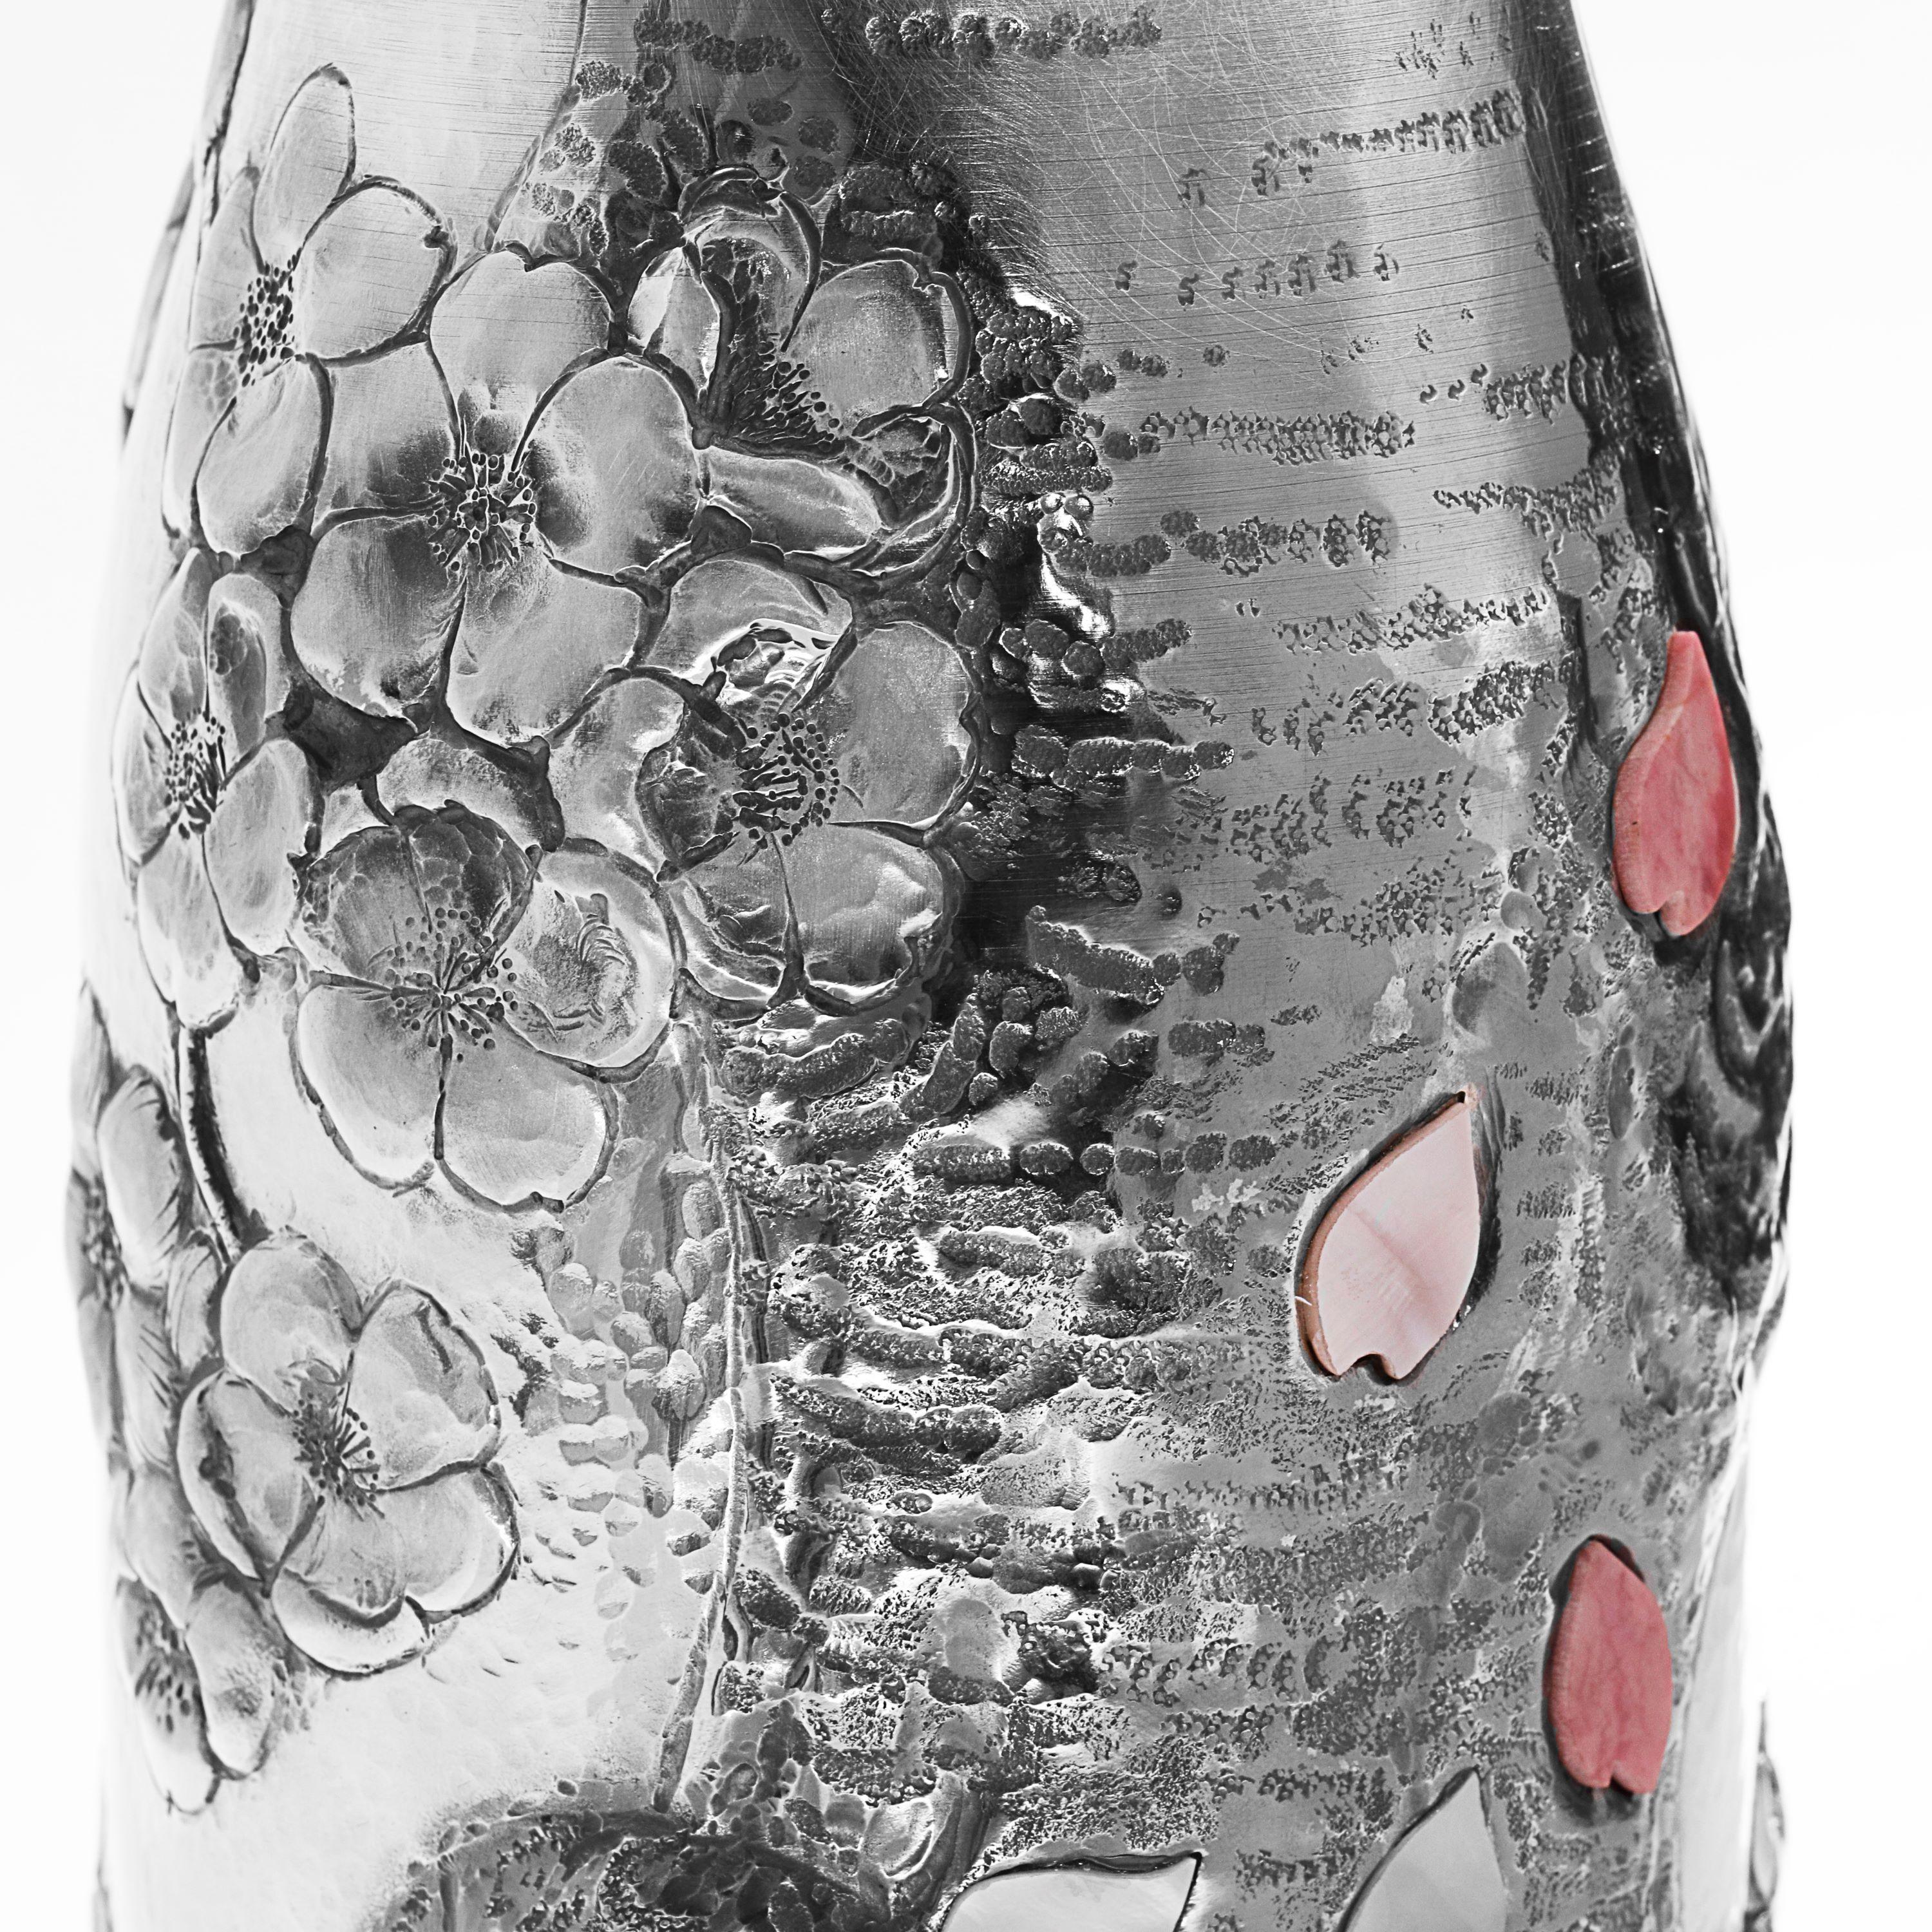 This champagne bottle cover is a true work of art and  belongs to the Works of Art collection. 
The K-OVER was made entirely by hand by Mary Yoshida, a Japanese artist currently living and working in Florence. The intent is to celebrate his home